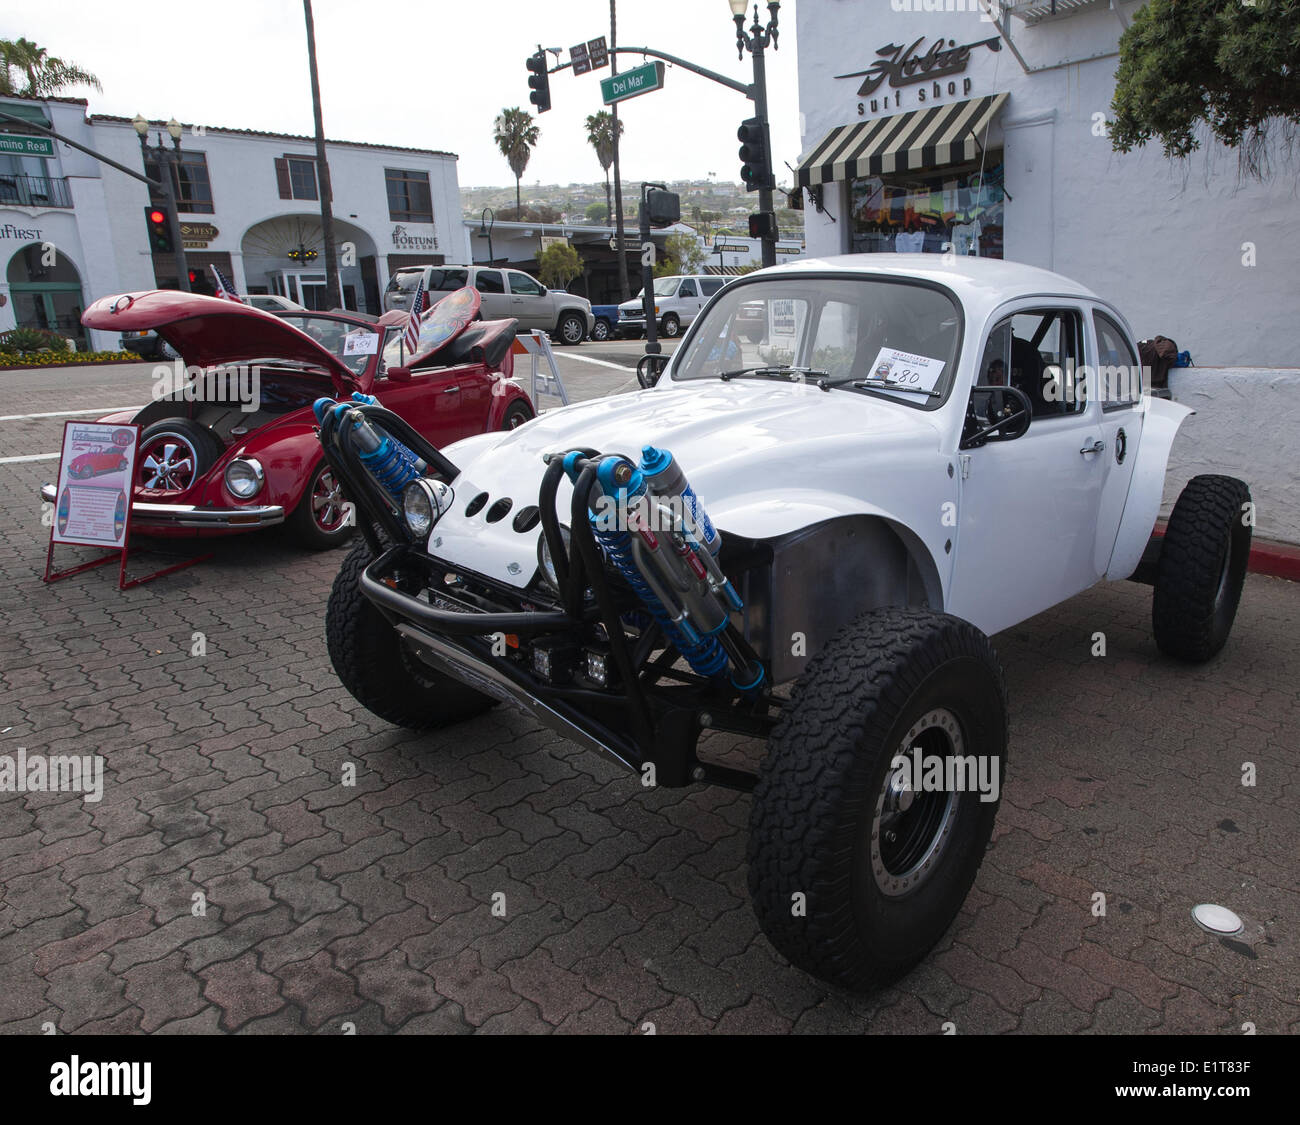 San Clemente, California, USA. 8th June, 2014. A custom out-fitted white Volkswagen Baja Bug The 19th Annual 2014 San Clemente Car Show featuring new and old classic and exotic cars and trucks took over the downtown along Avenida Del Mar on Sunday, June 8, 2014. The one day event brings car collectors and enthusiasts from all over southern California. Credit:  David Bro/ZUMAPRESS.com/Alamy Live News Stock Photo